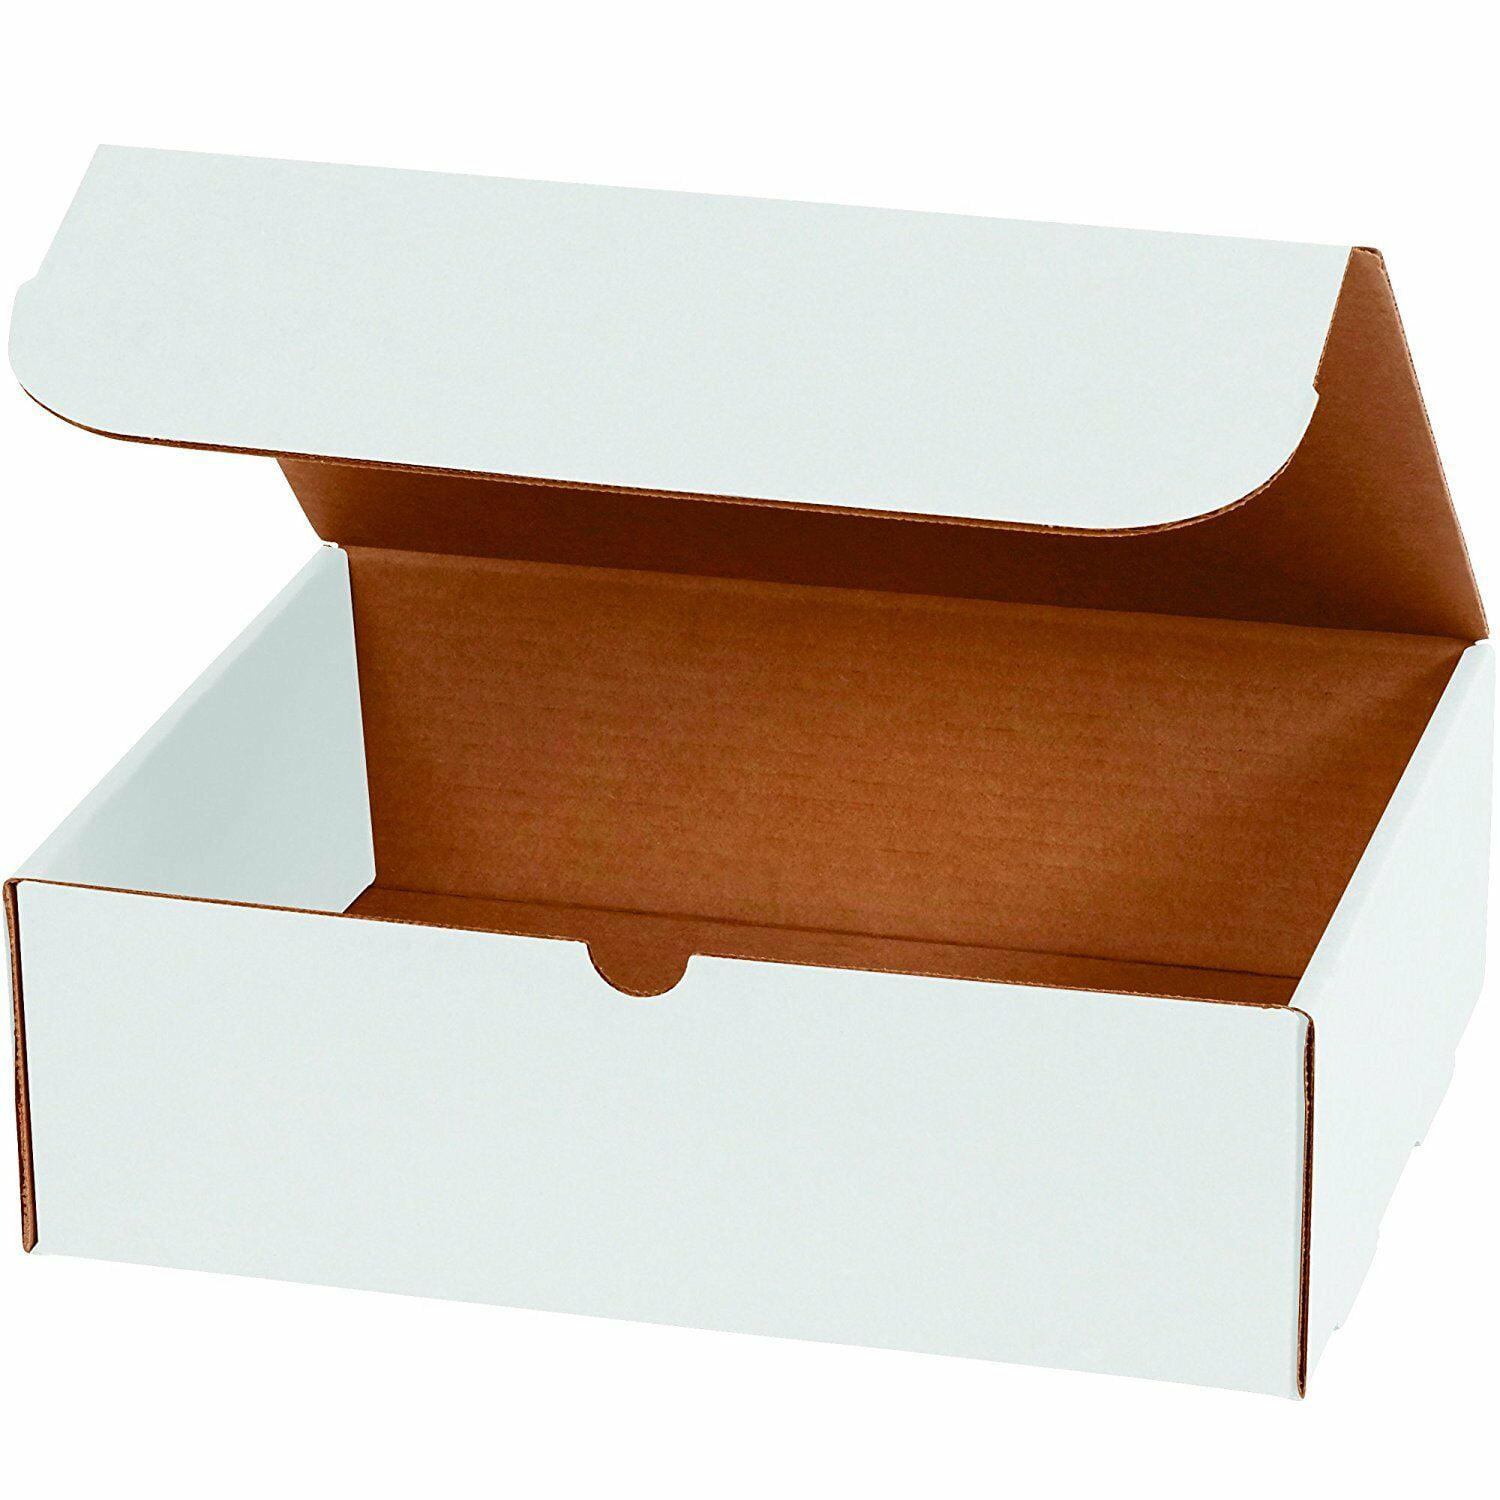 Cardboard Shipping Boxes Oyster White Inner Size 9 x 6 x 2 Corrugated Mailer 150 